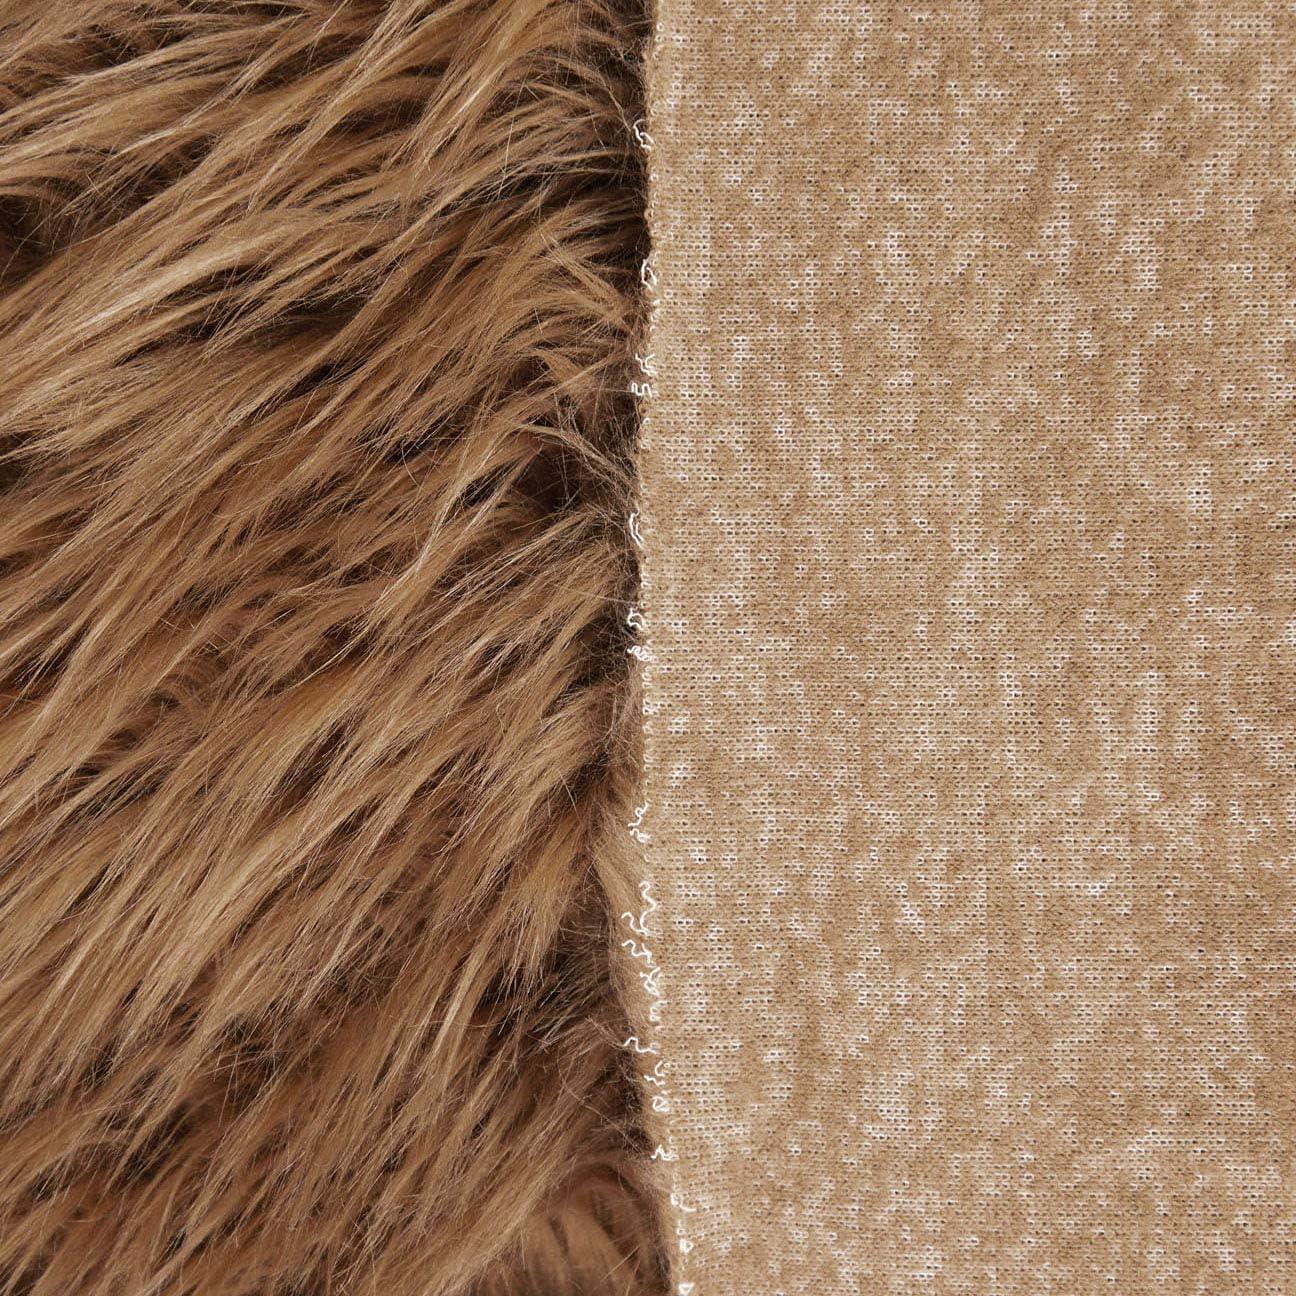 FabricLA Shaggy Faux Fur Fabric by The Yard - 72 x 60 Inches (180 cm x  150 cm) - Fake Fur Fabric for Sewing Apparel, Vests, Rugs, Pillows - Faux